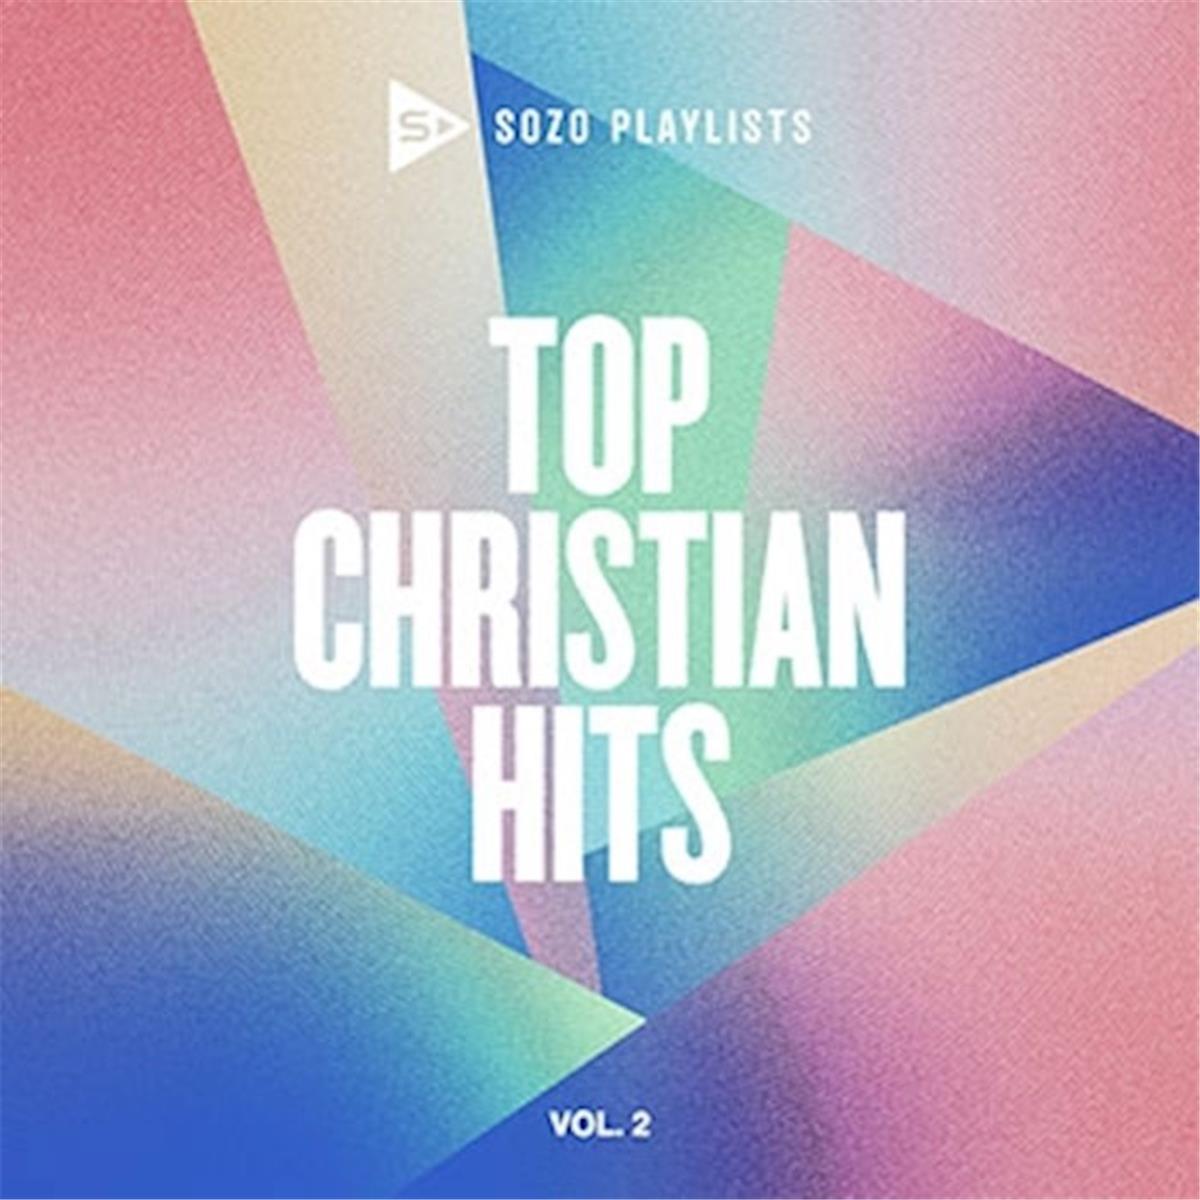 Picture of Sparrow Records 262723 Sozo Playlists Top Christian Hits Volume 2 Audio CD